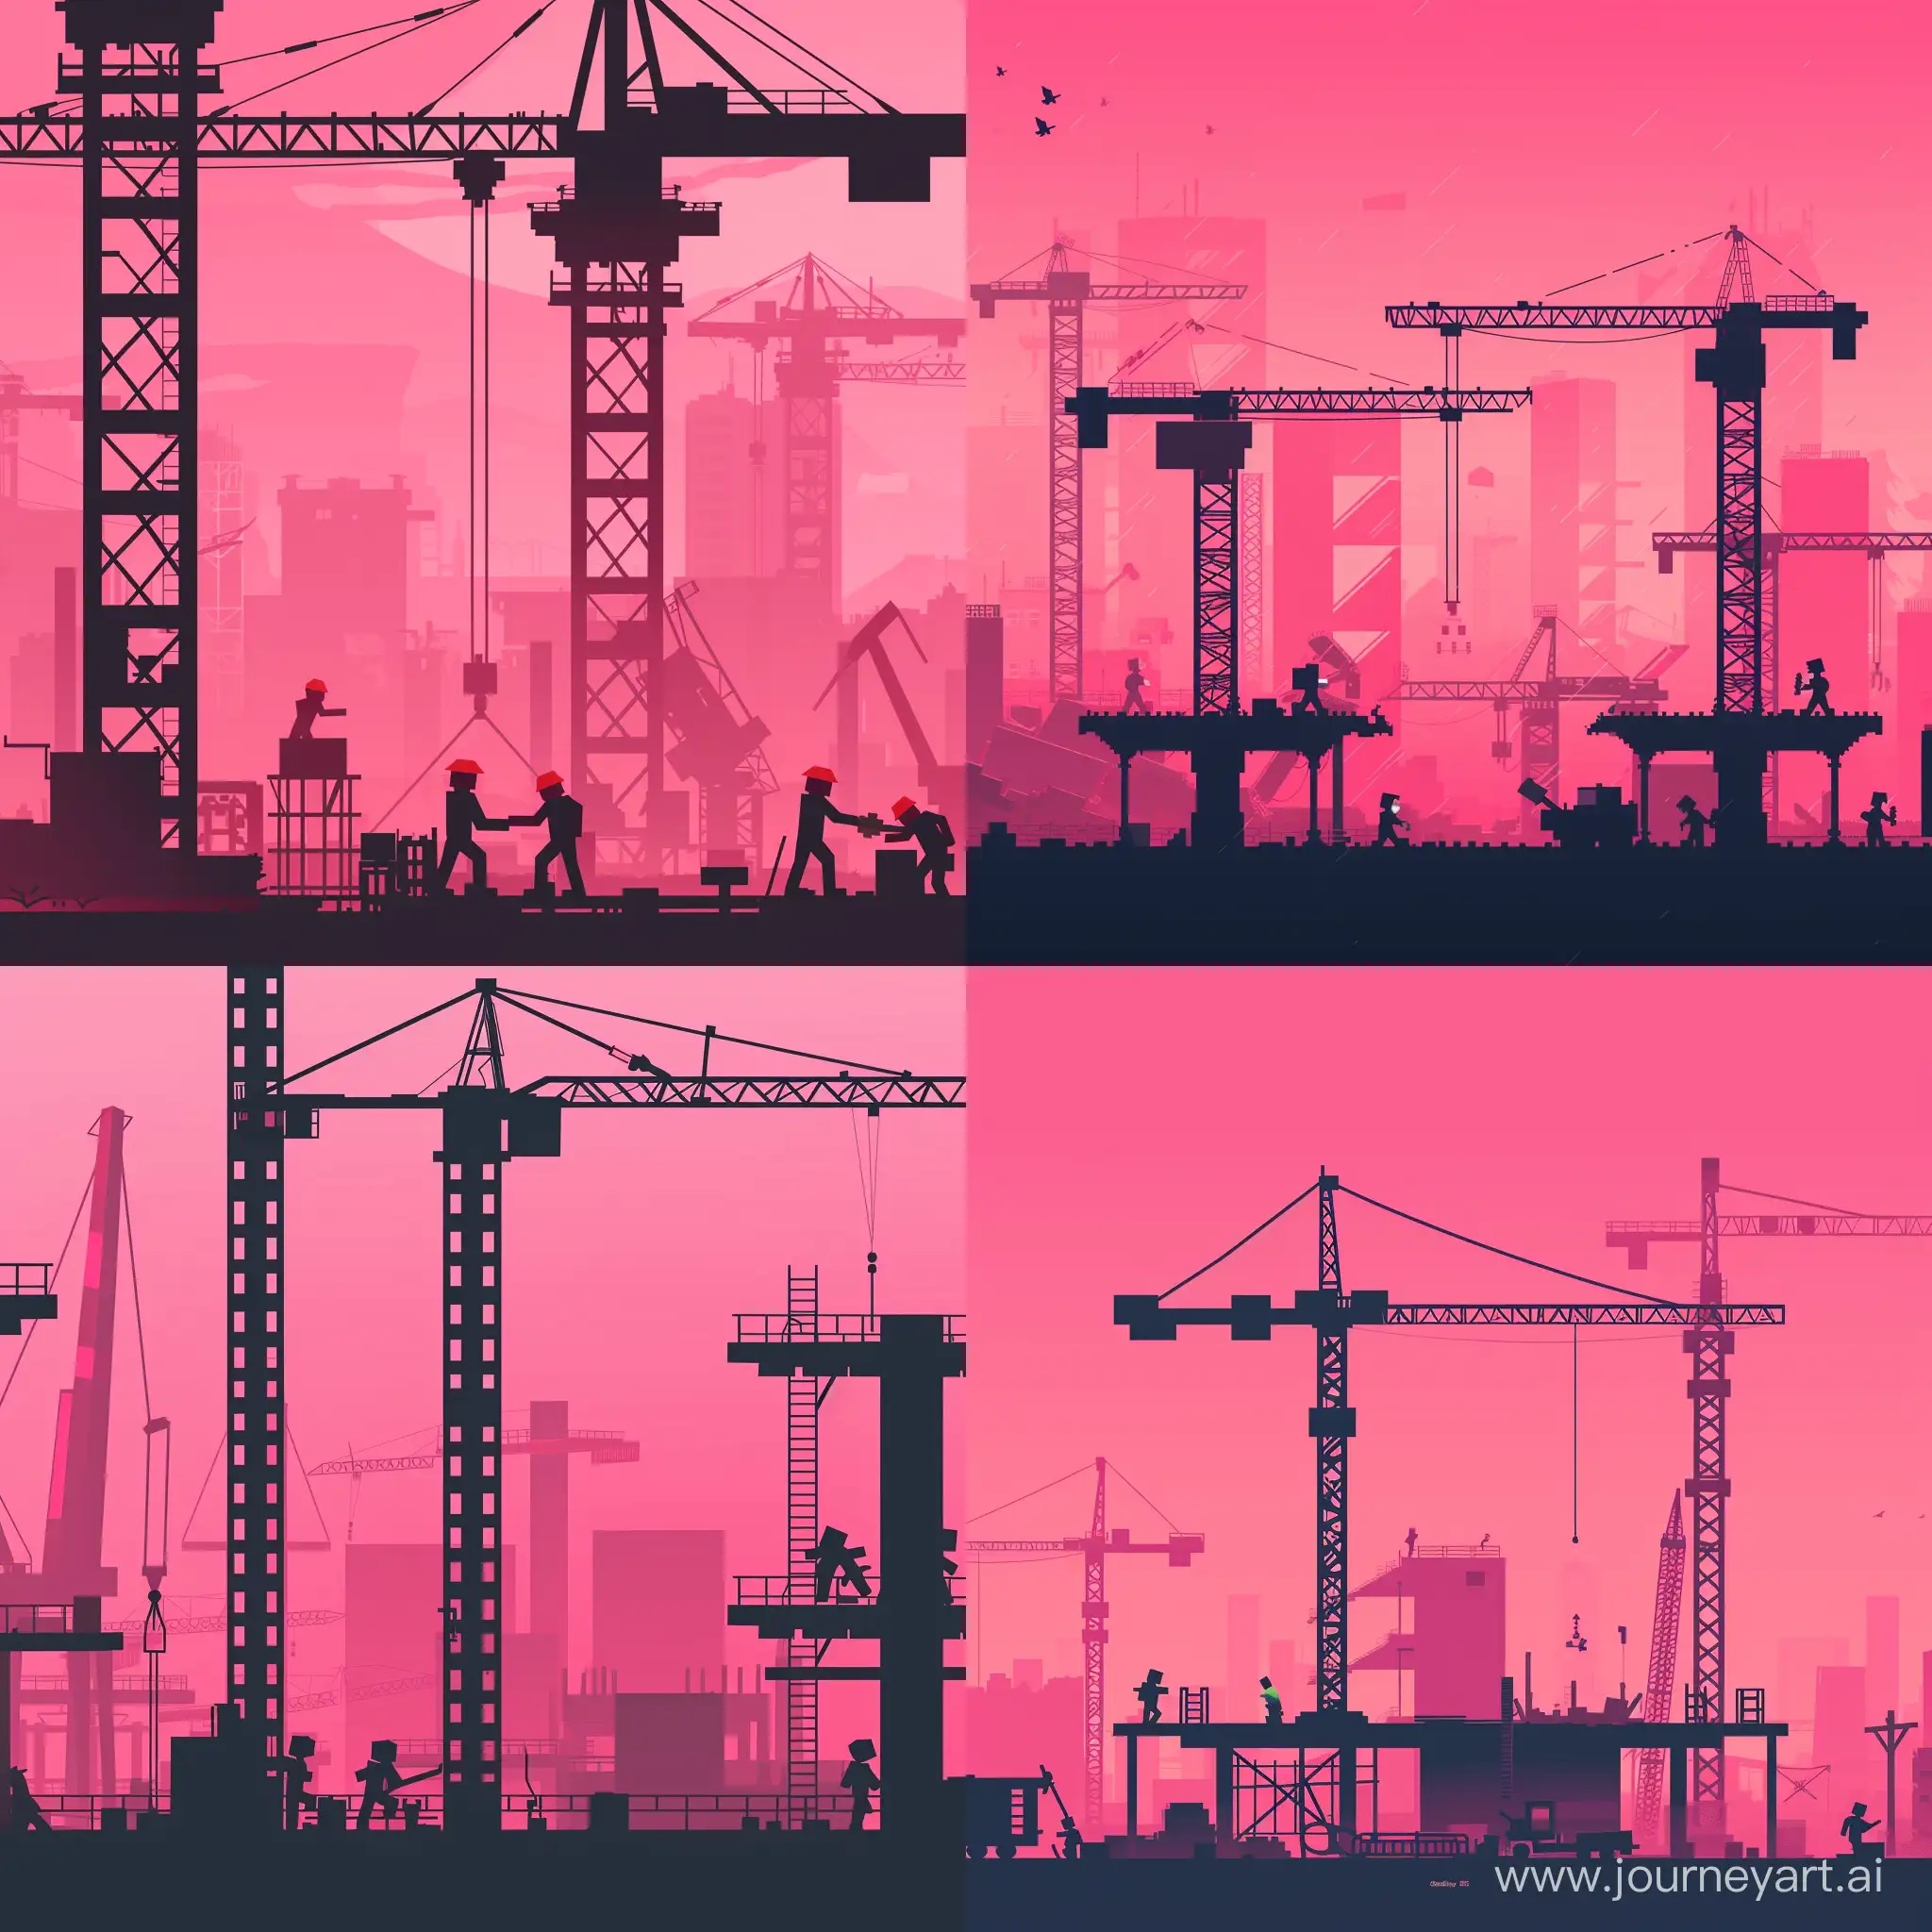 Banner in proportion 4:3, HD art. Theme of minecraft logo. The background is pink gradient color,black high-rise cranes in the background, constructivism, vector design, workers, dribbble illustration